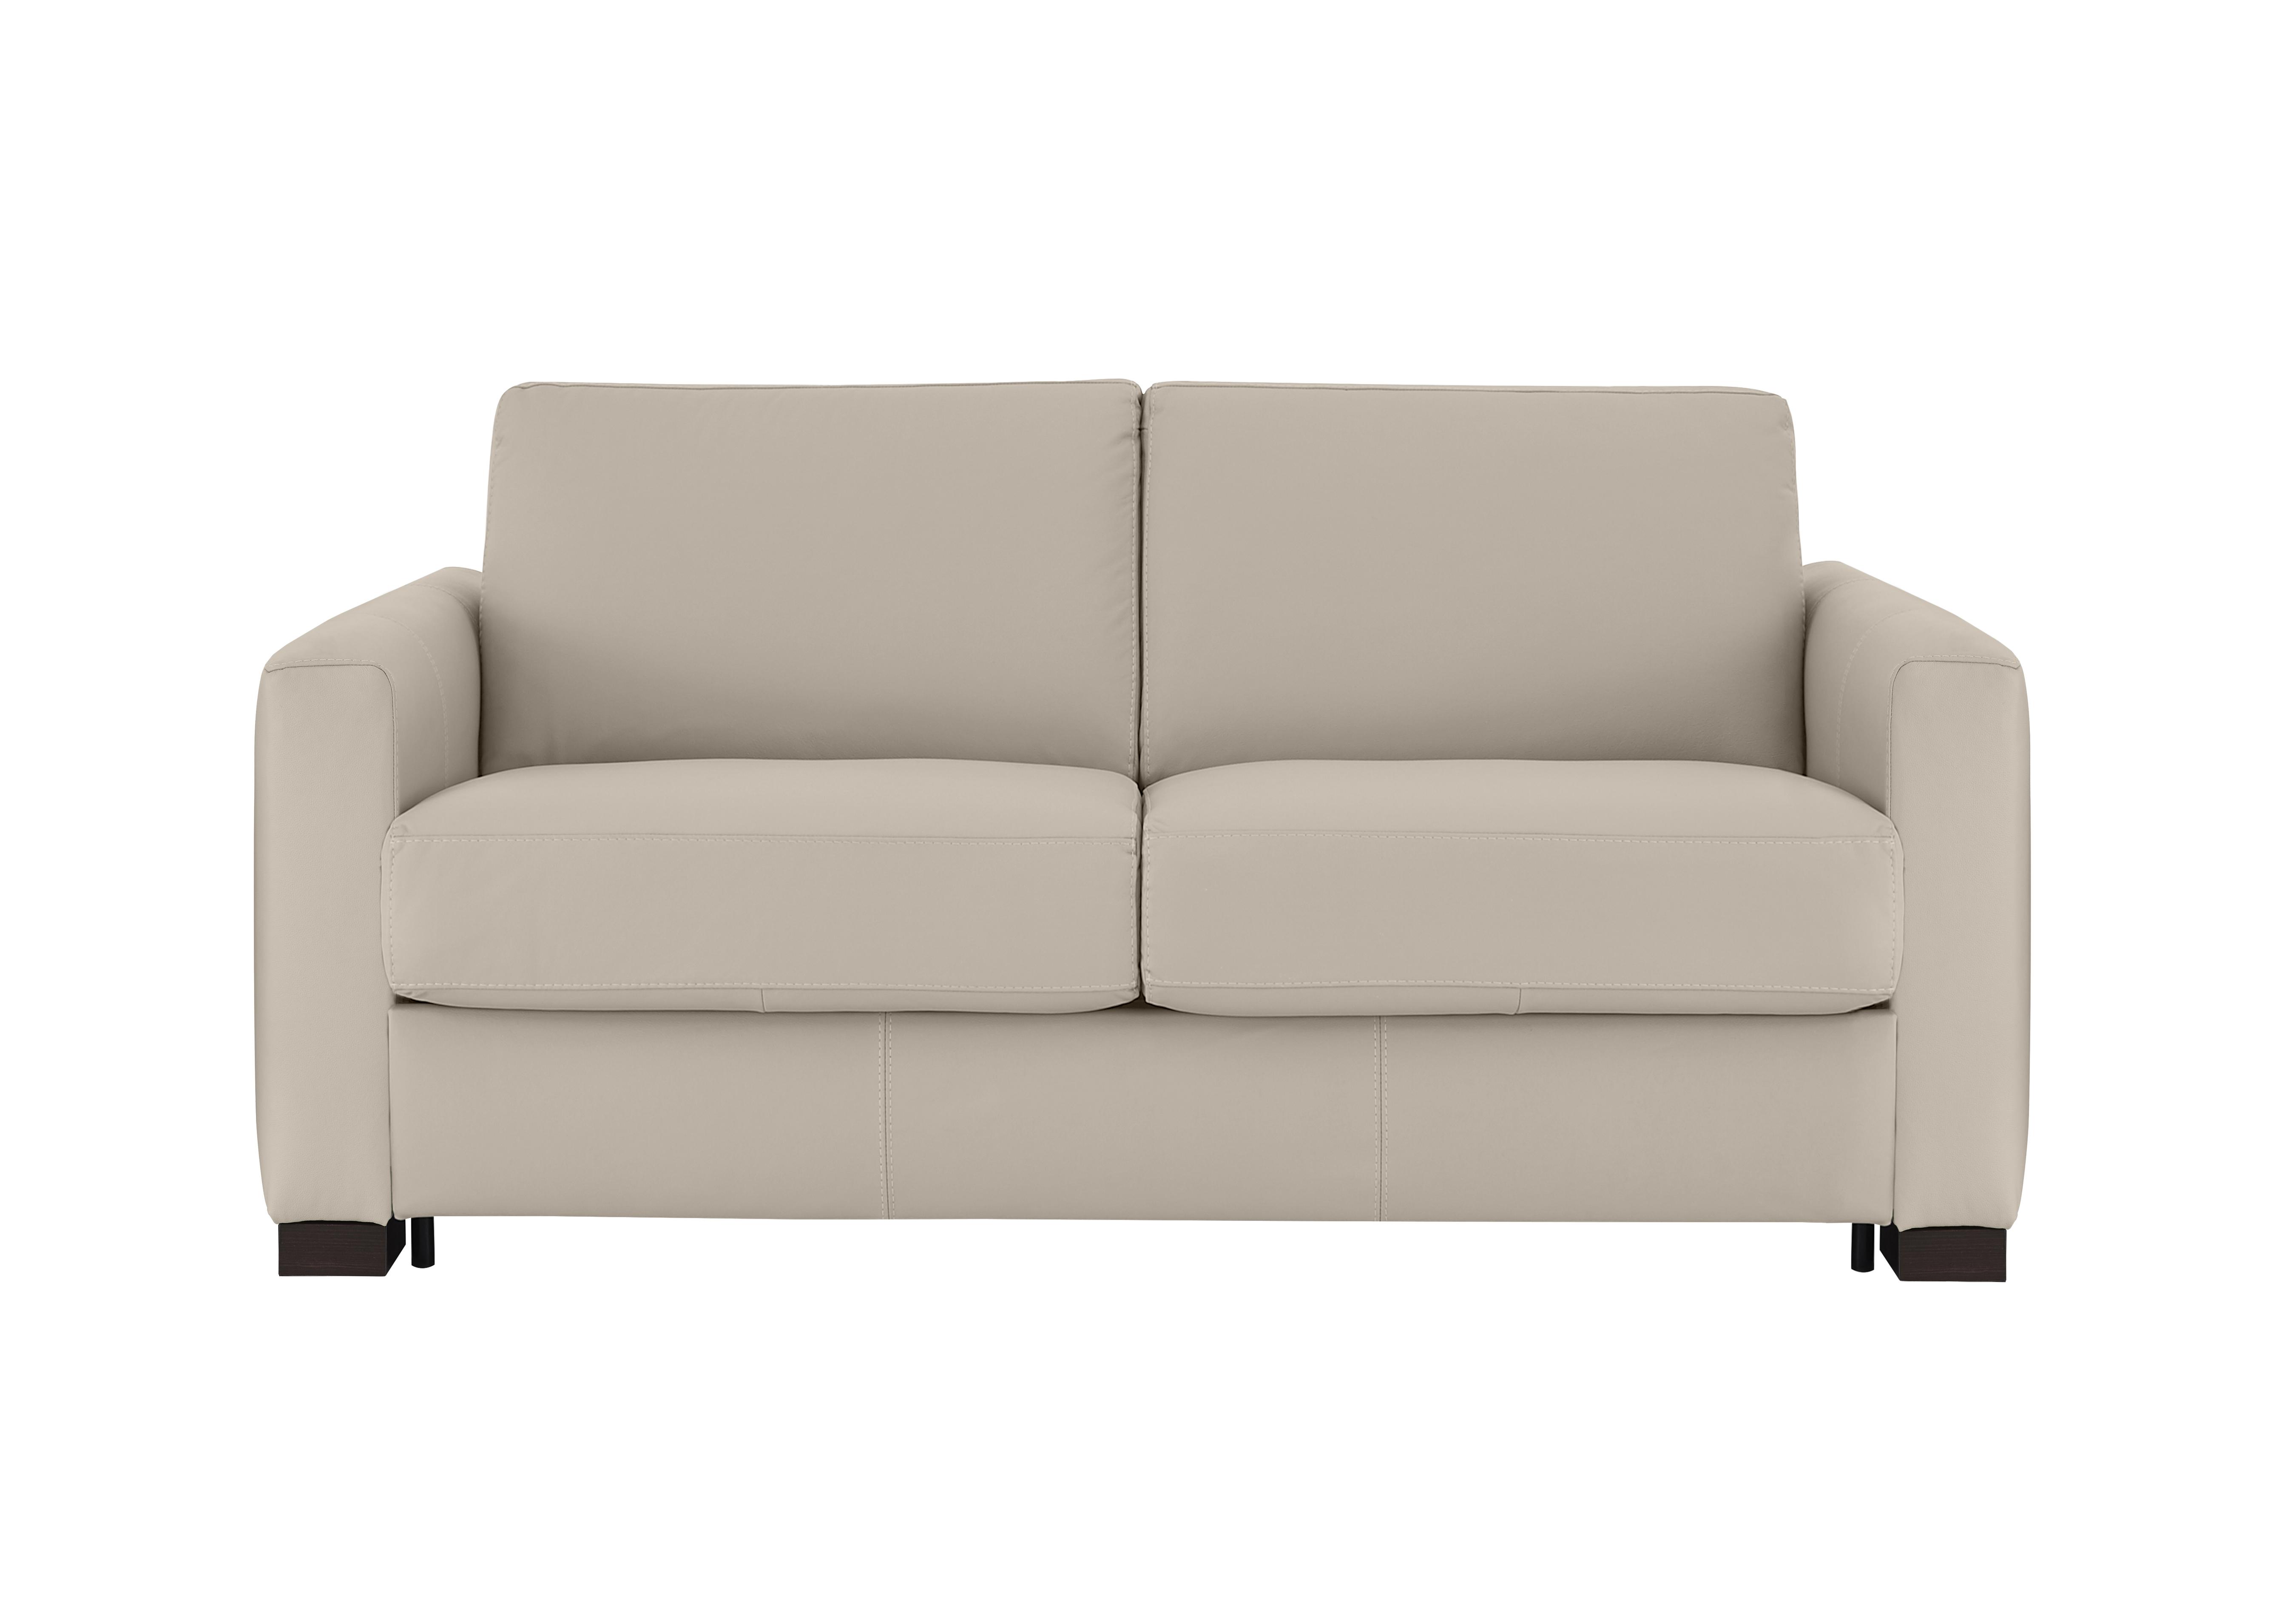 Alcova 2 Seater Leather Sofa Bed with Box Arms in Botero Crema 2156 on Furniture Village